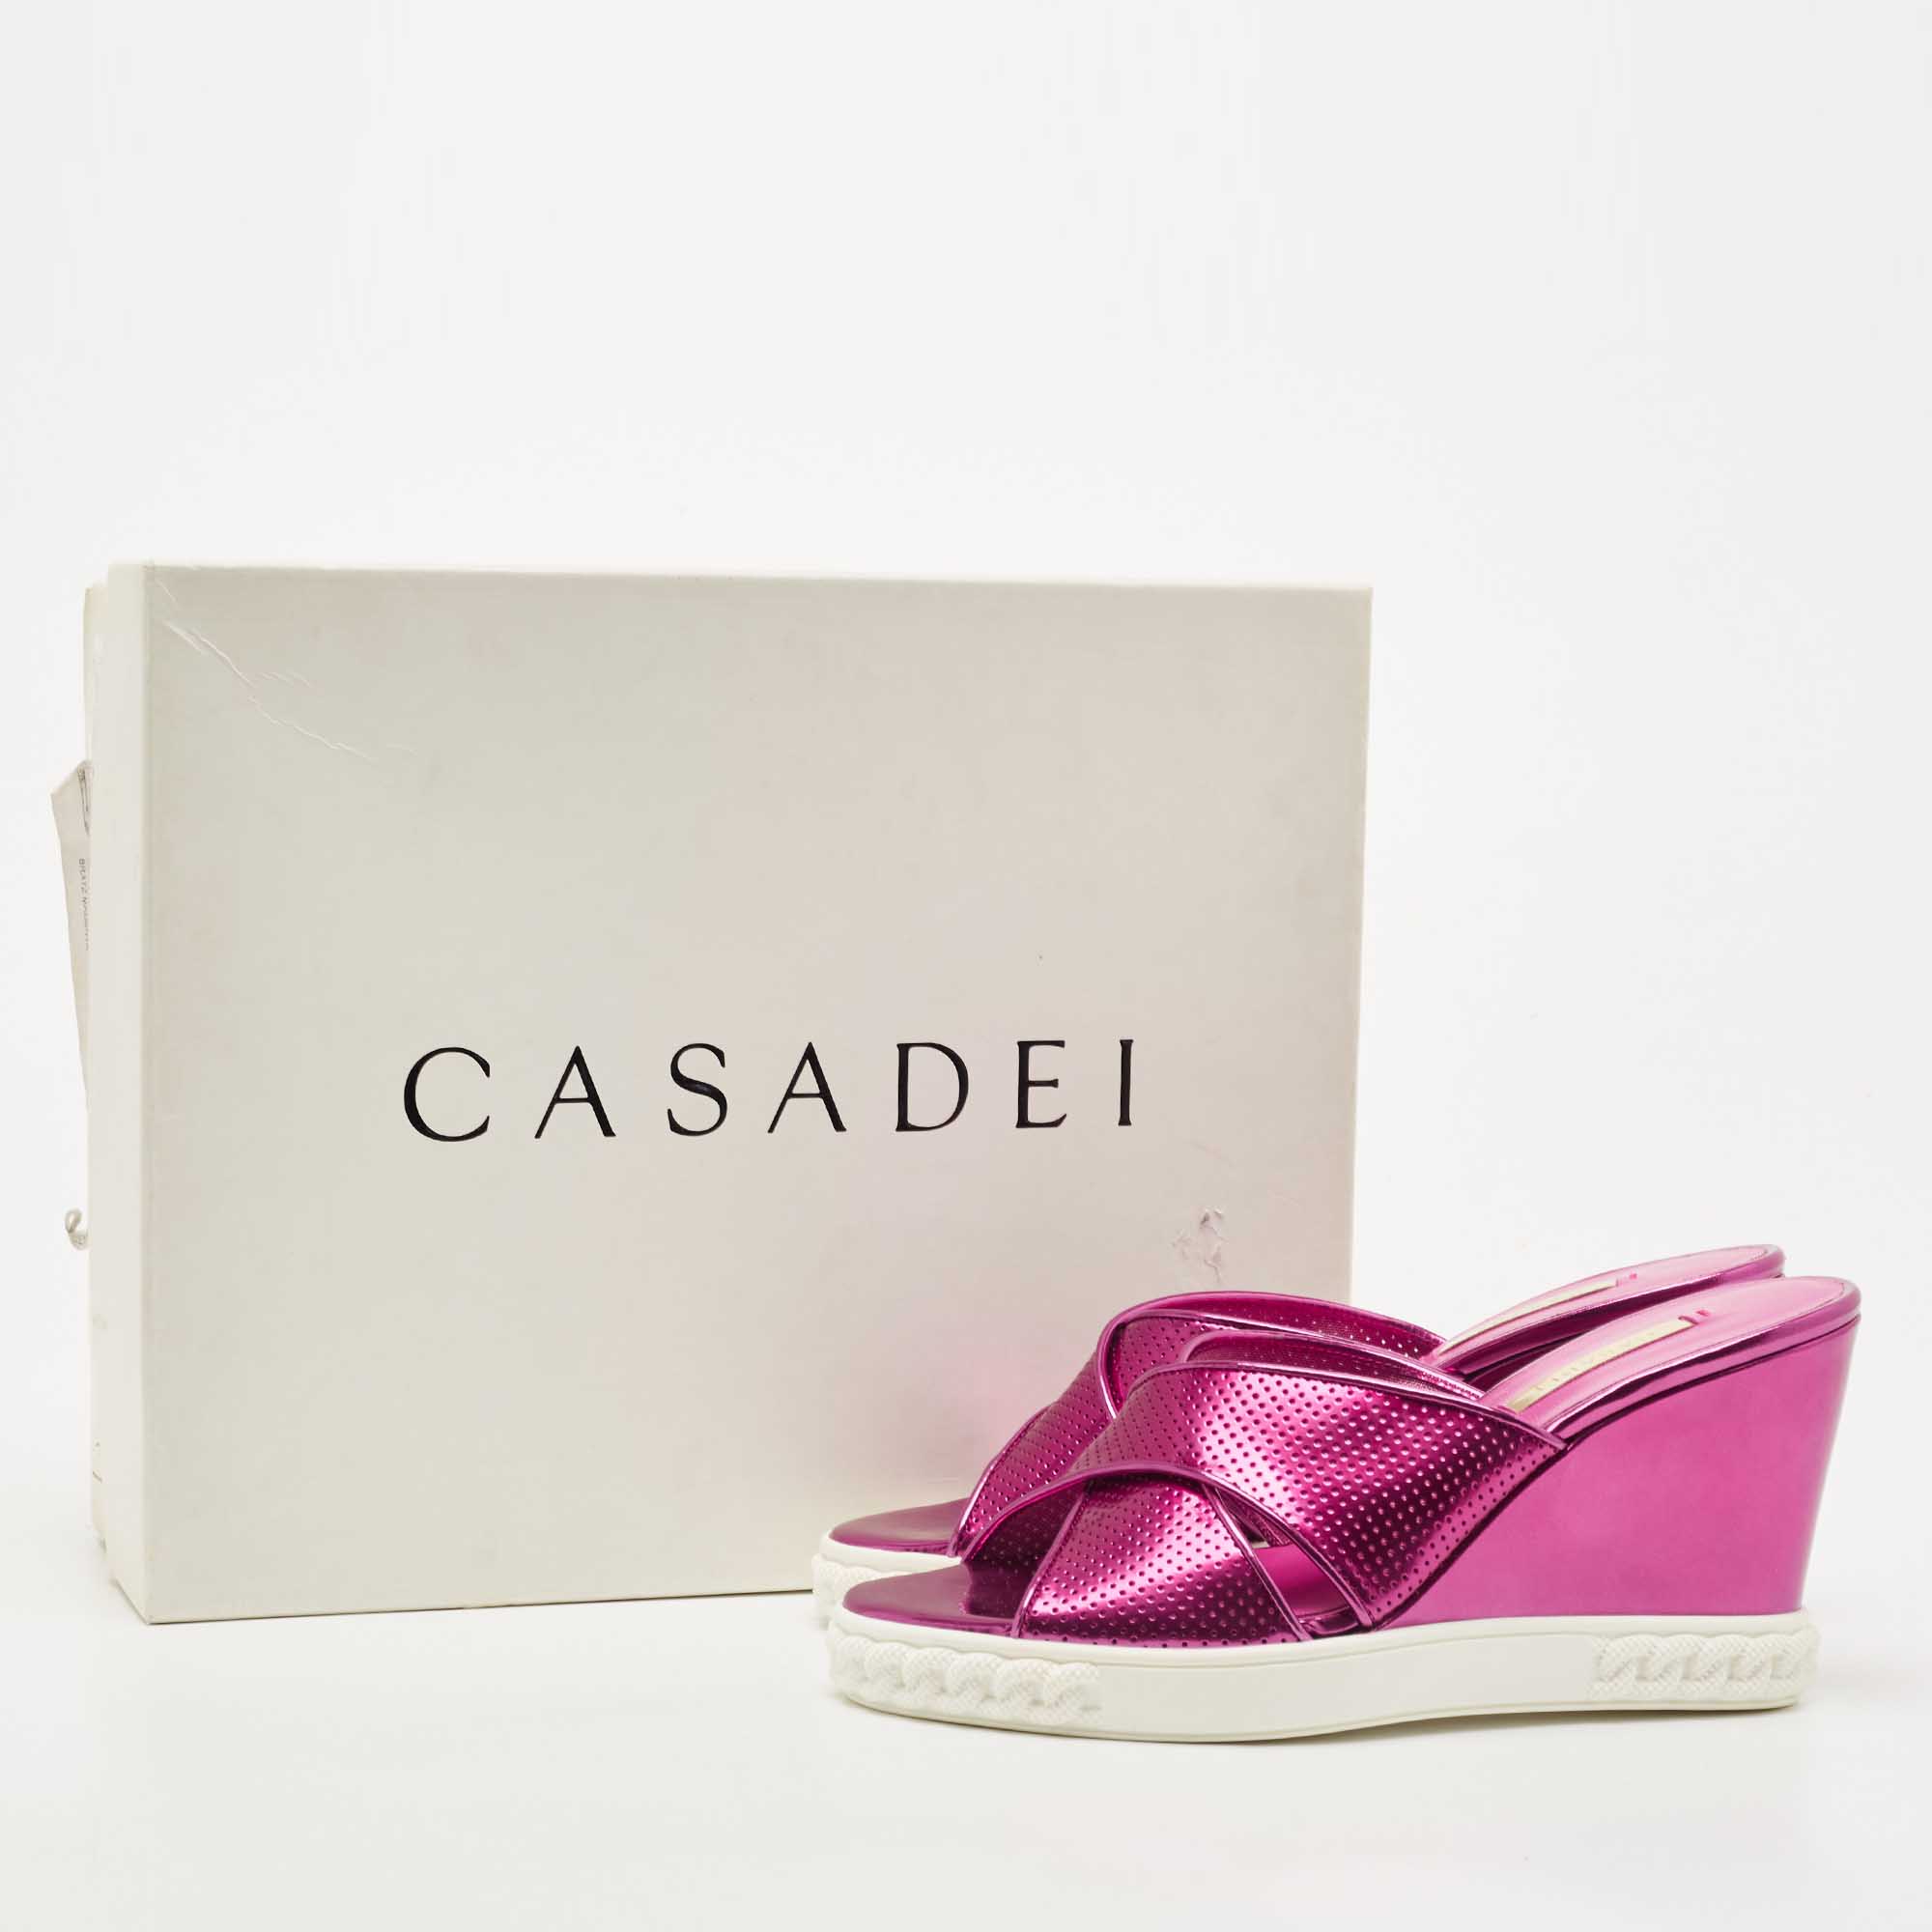 Casadei Pink Perforated Patent Leather Criss Cross Wedge Sandals Size 38